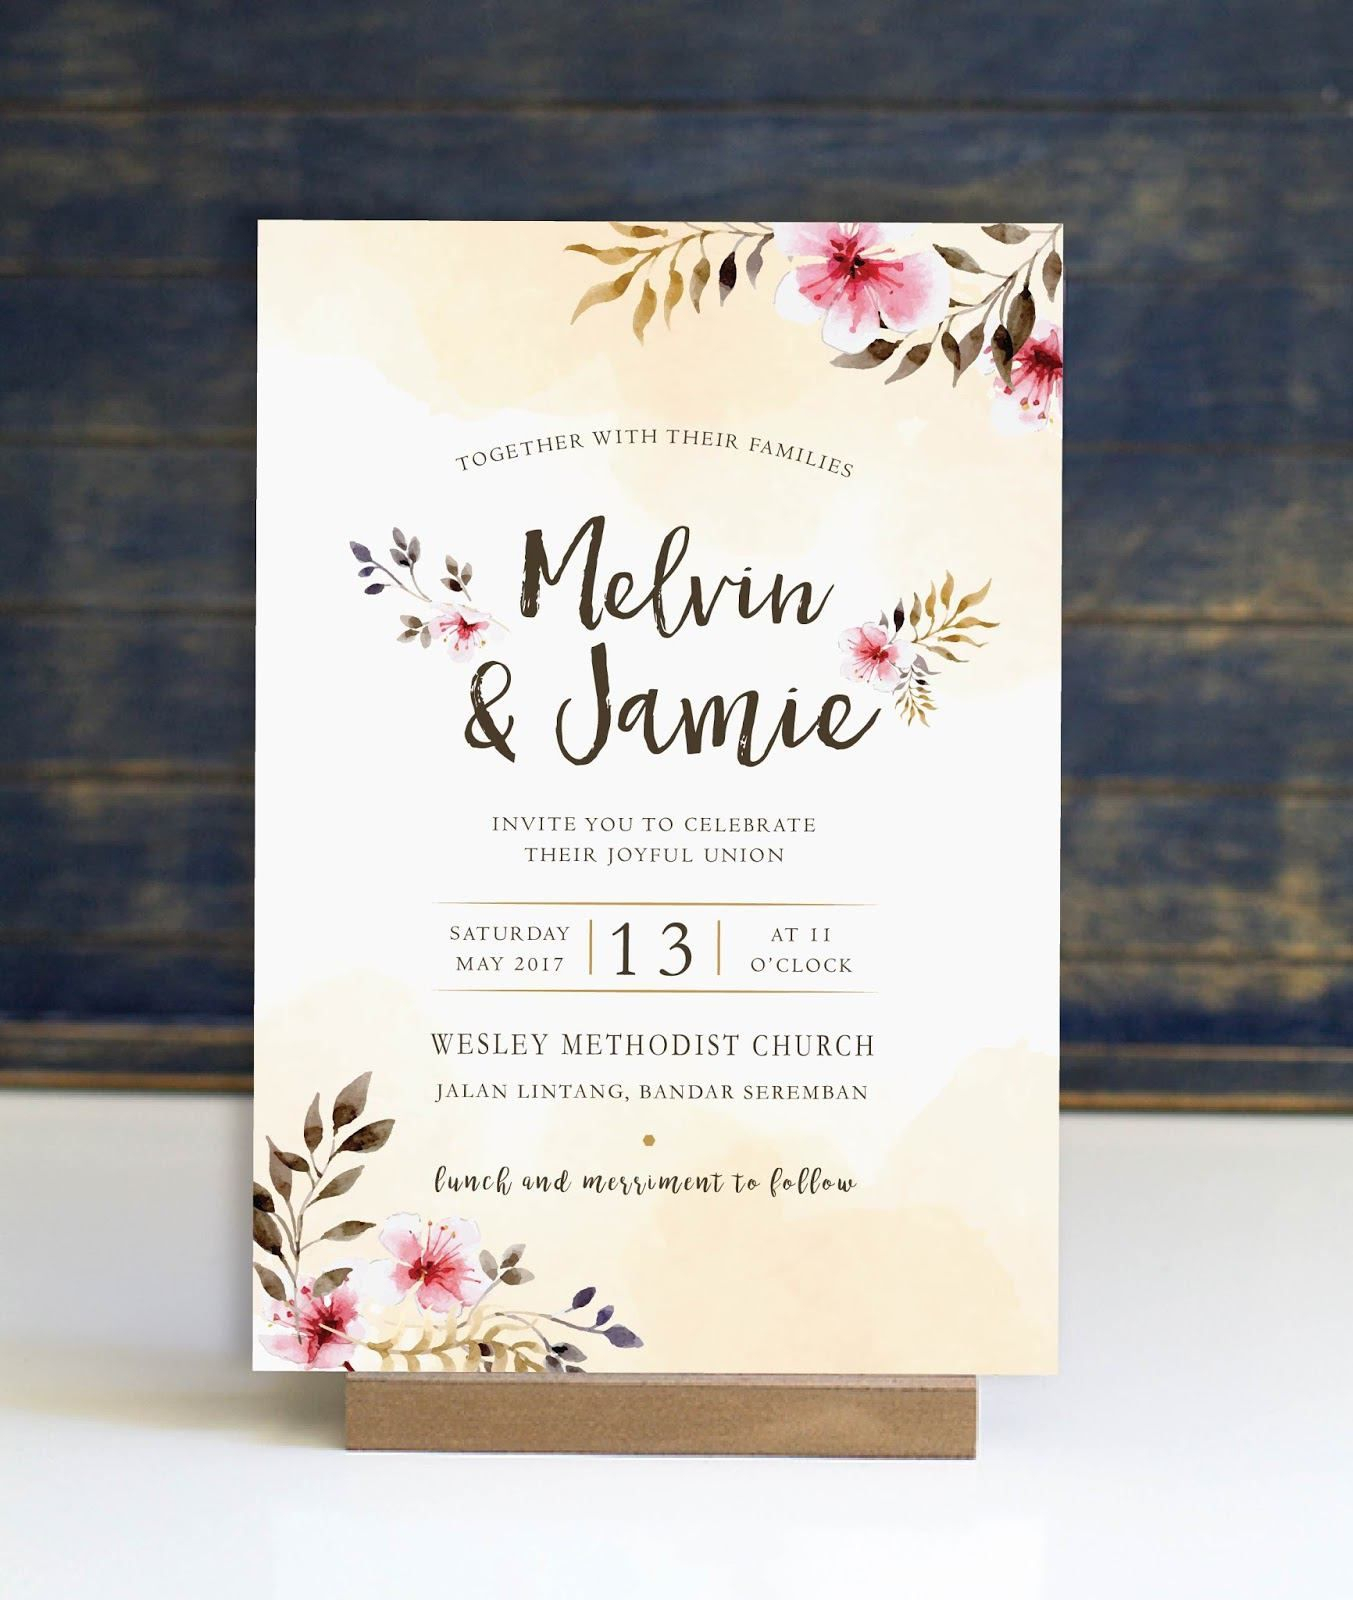 Pin On Ss Wedding Invitations With Church Wedding Invitation Card Template